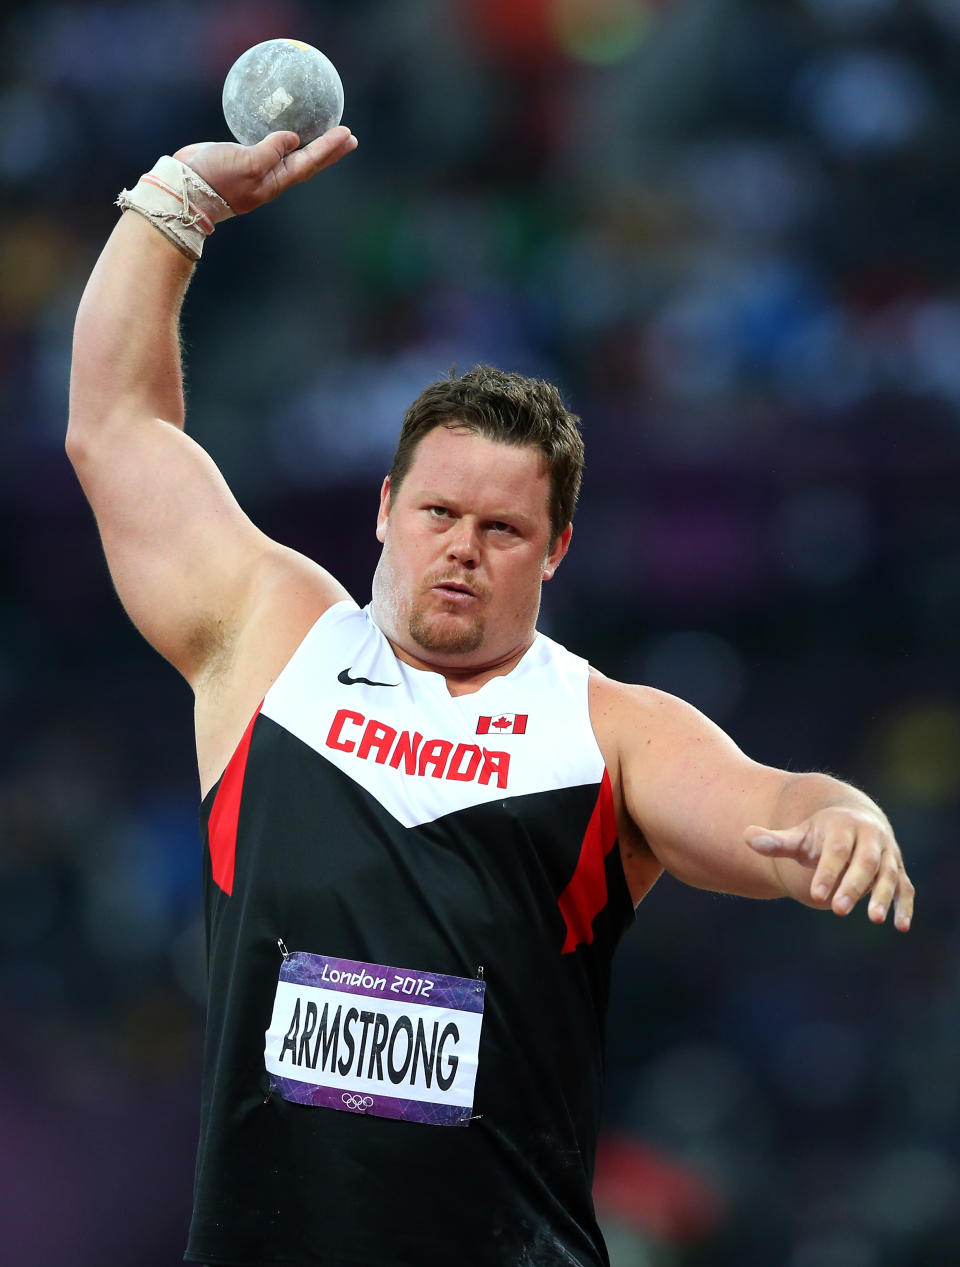 LONDON, ENGLAND - AUGUST 03: Dylan Armstrong of Canada competes in the Men's Shot Put Final on Day 7 of the London 2012 Olympic Games at Olympic Stadium on August 3, 2012 in London, England. (Photo by Alexander Hassenstein/Getty Images)